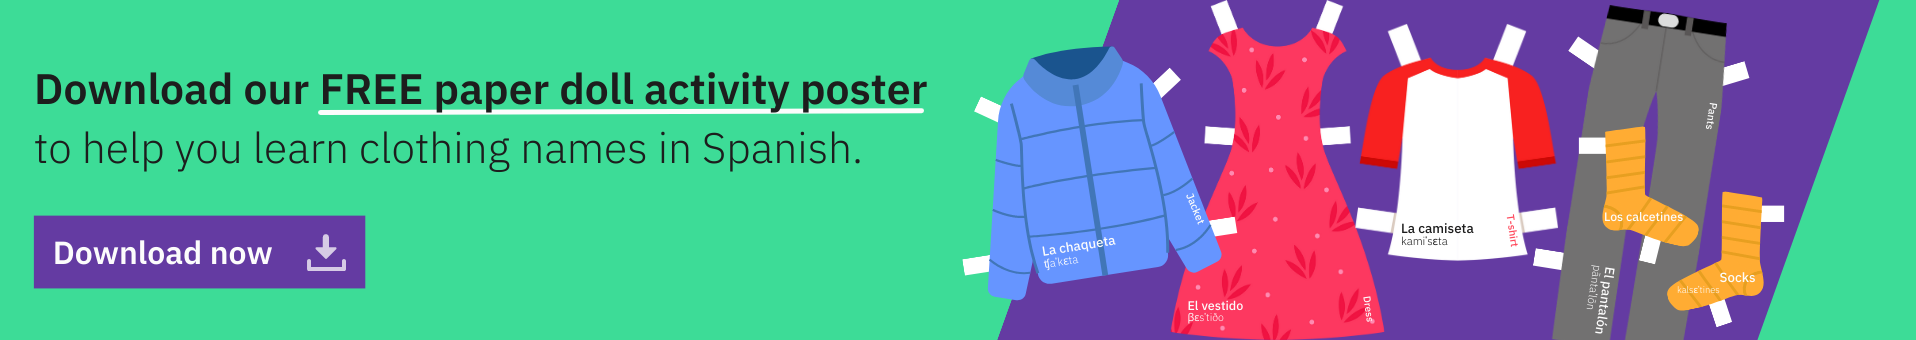 Free Berlitz printable poster to help you learn the most common clothing items in Spanish.